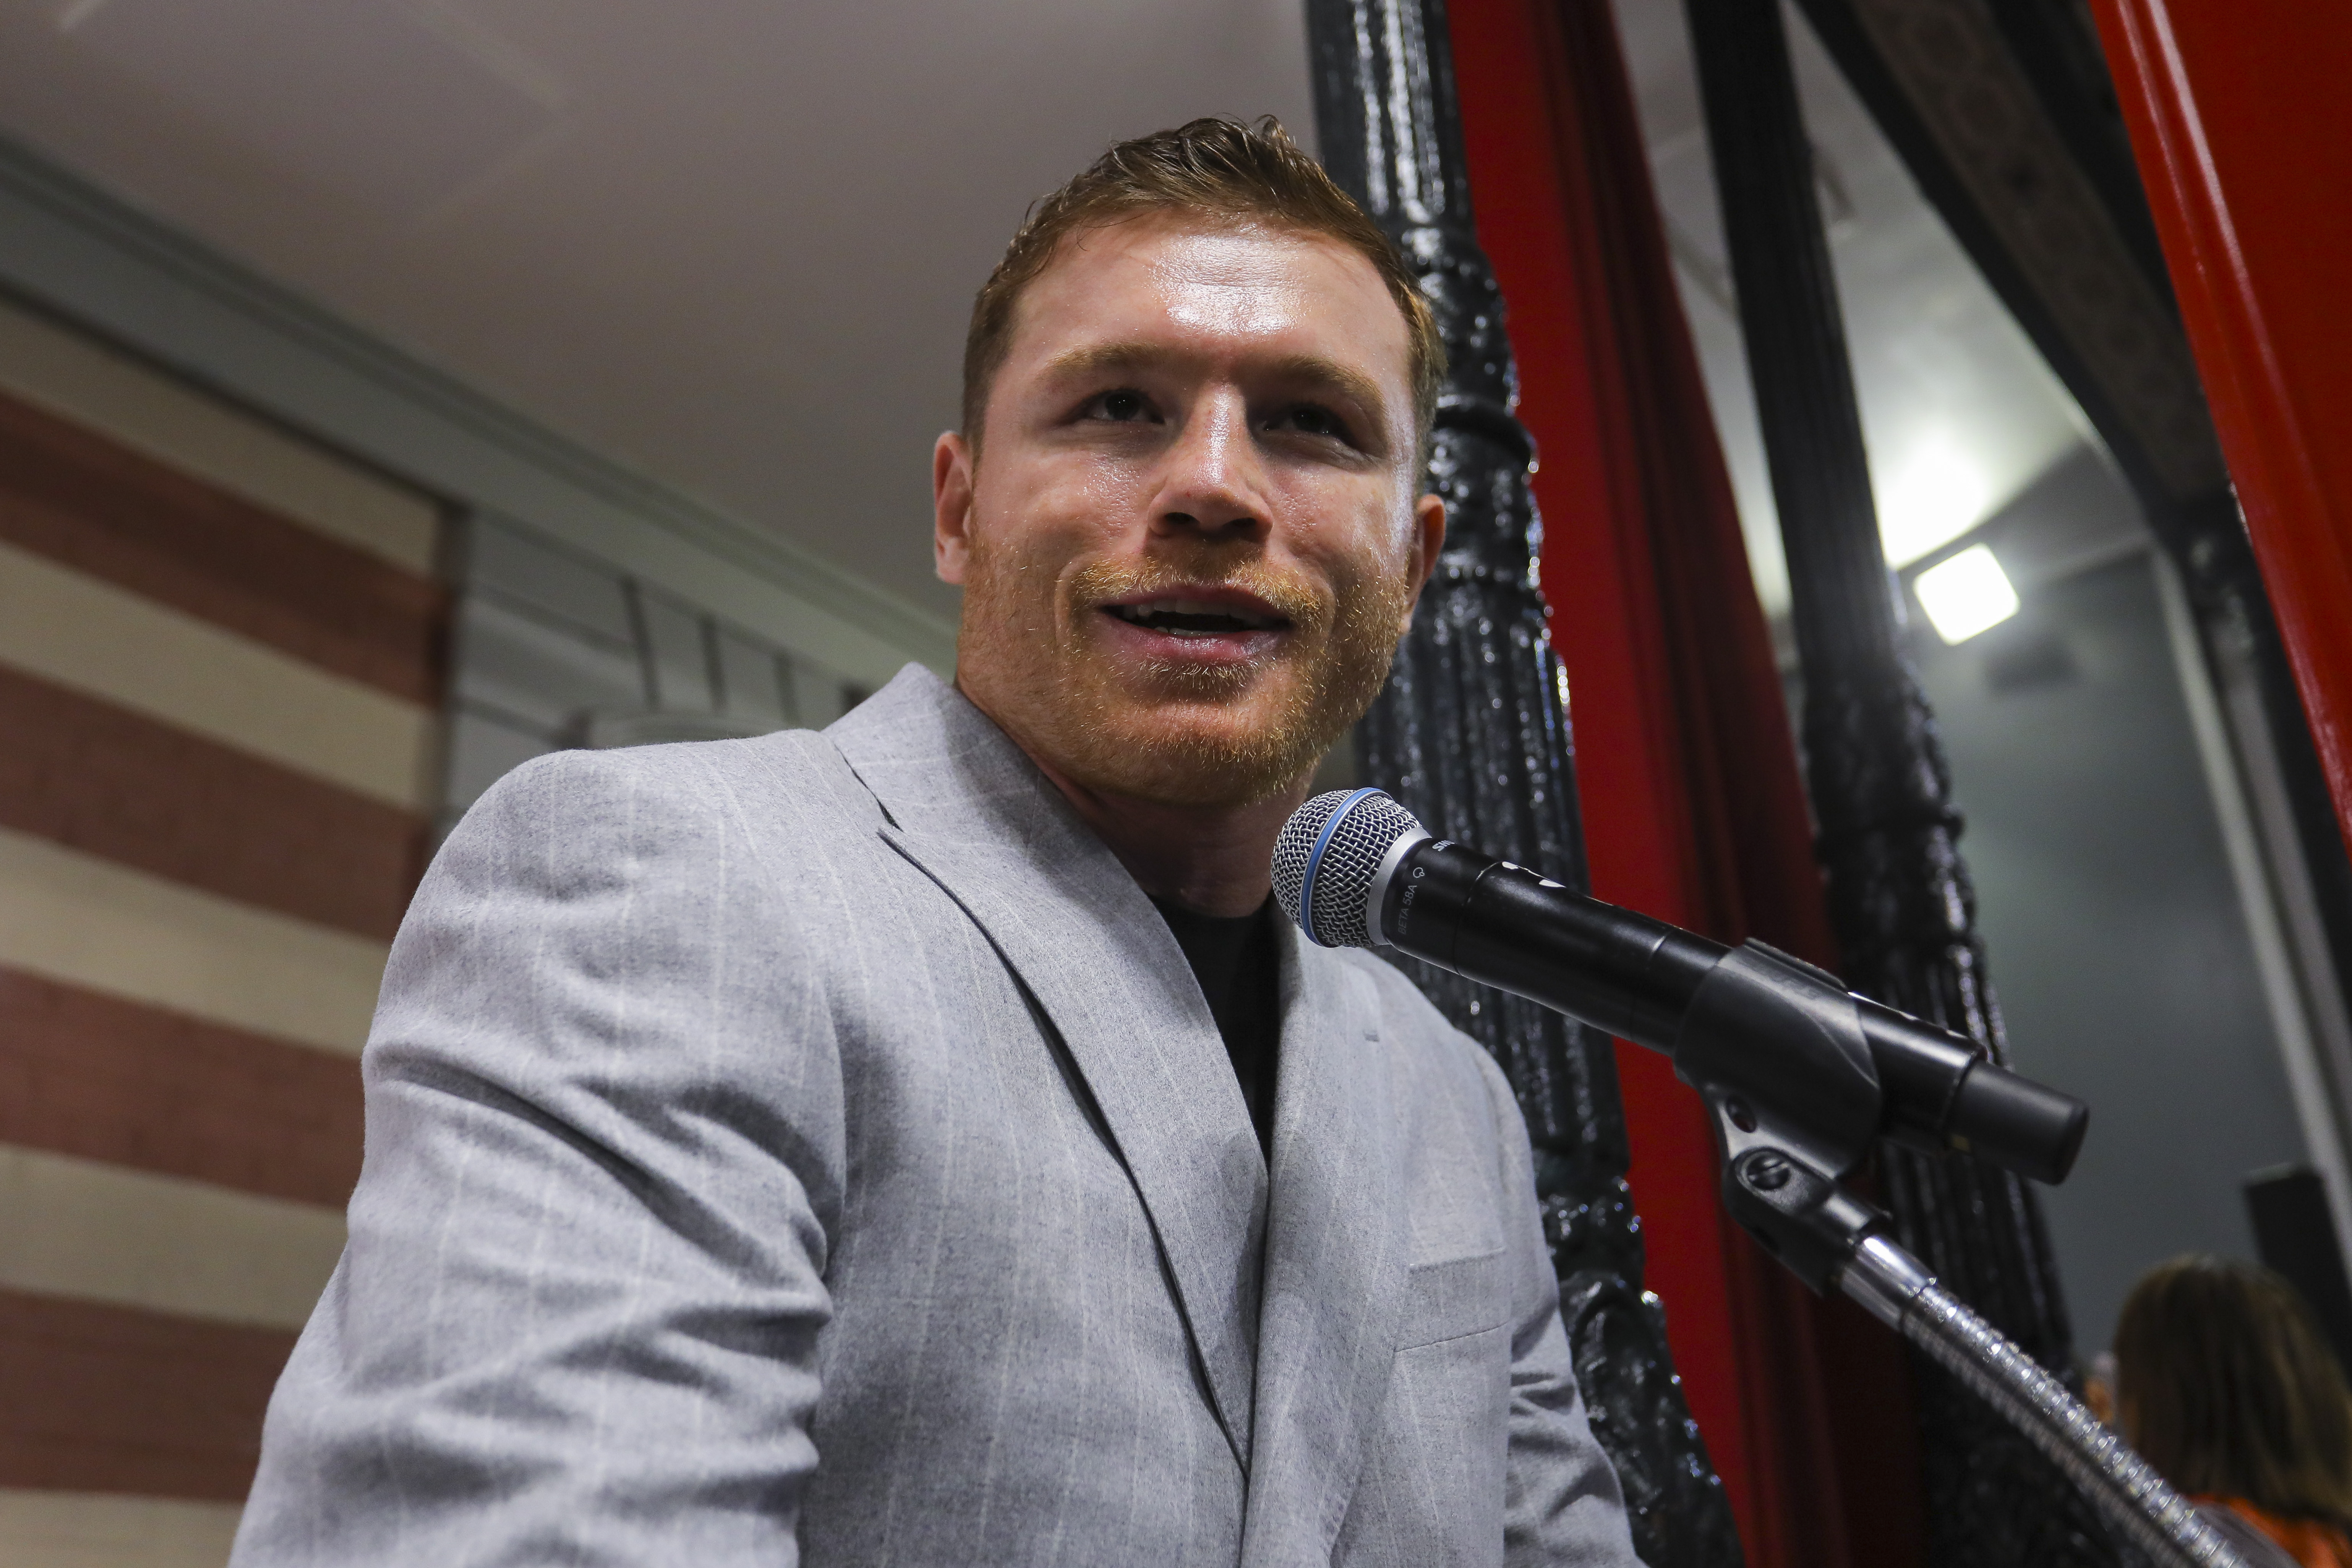 Canelo Alvarez is headed to PBC and much more on this week’s show!